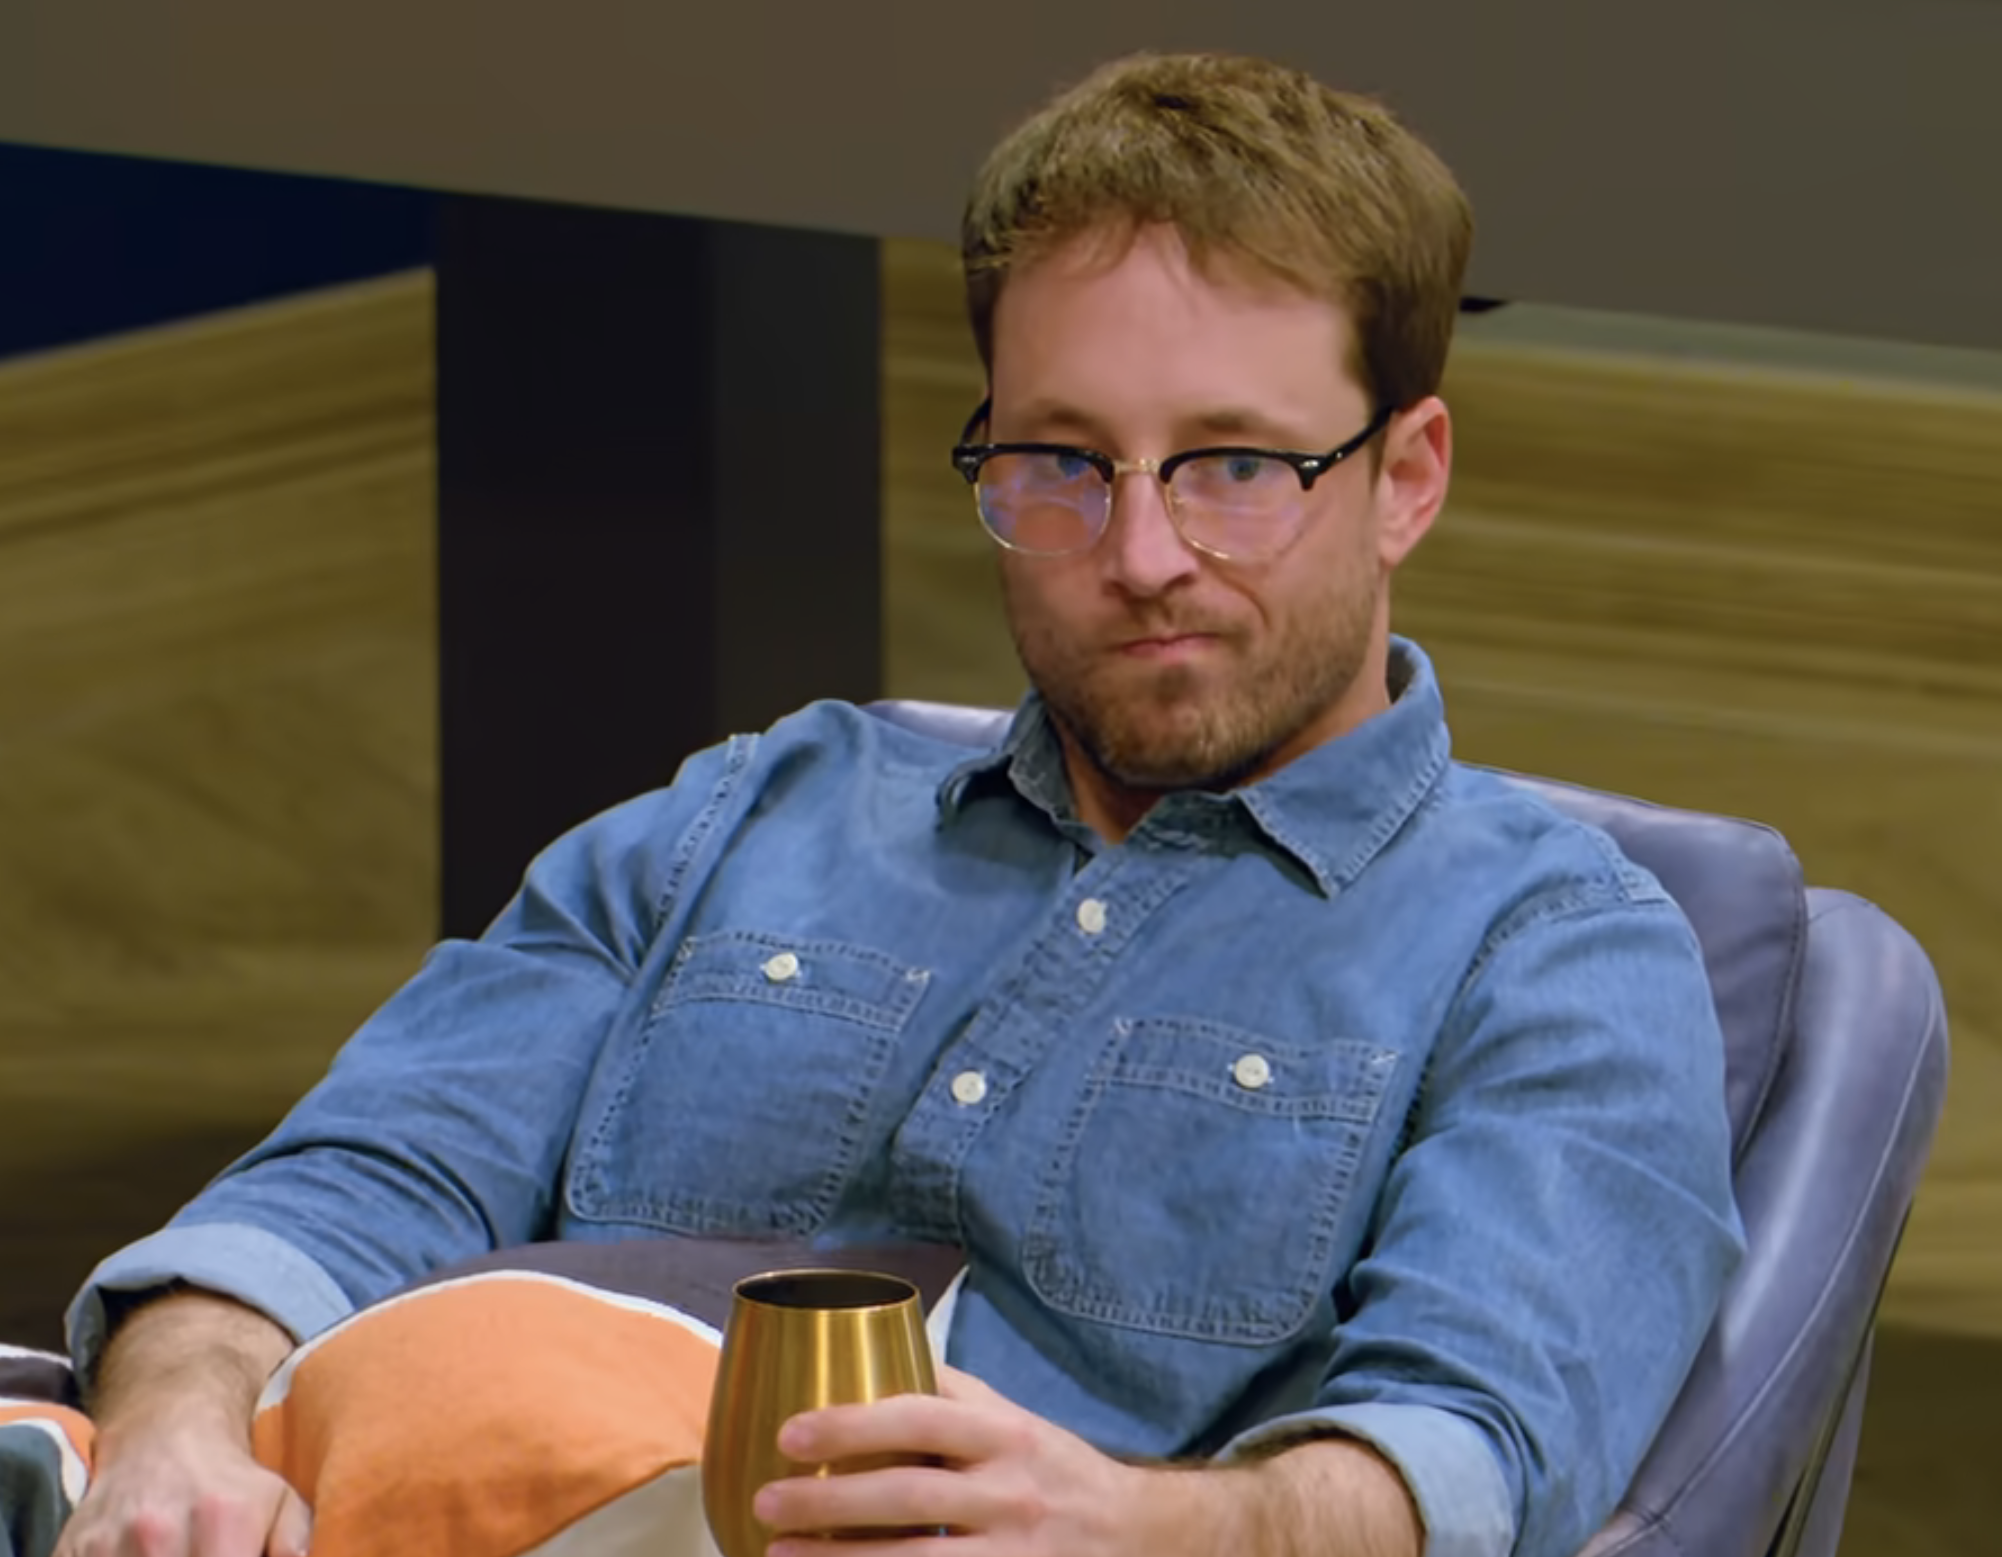 Jeramey Lutinski  in a denim shirt sitting with a cup, looking toward camera, with a screen in the background